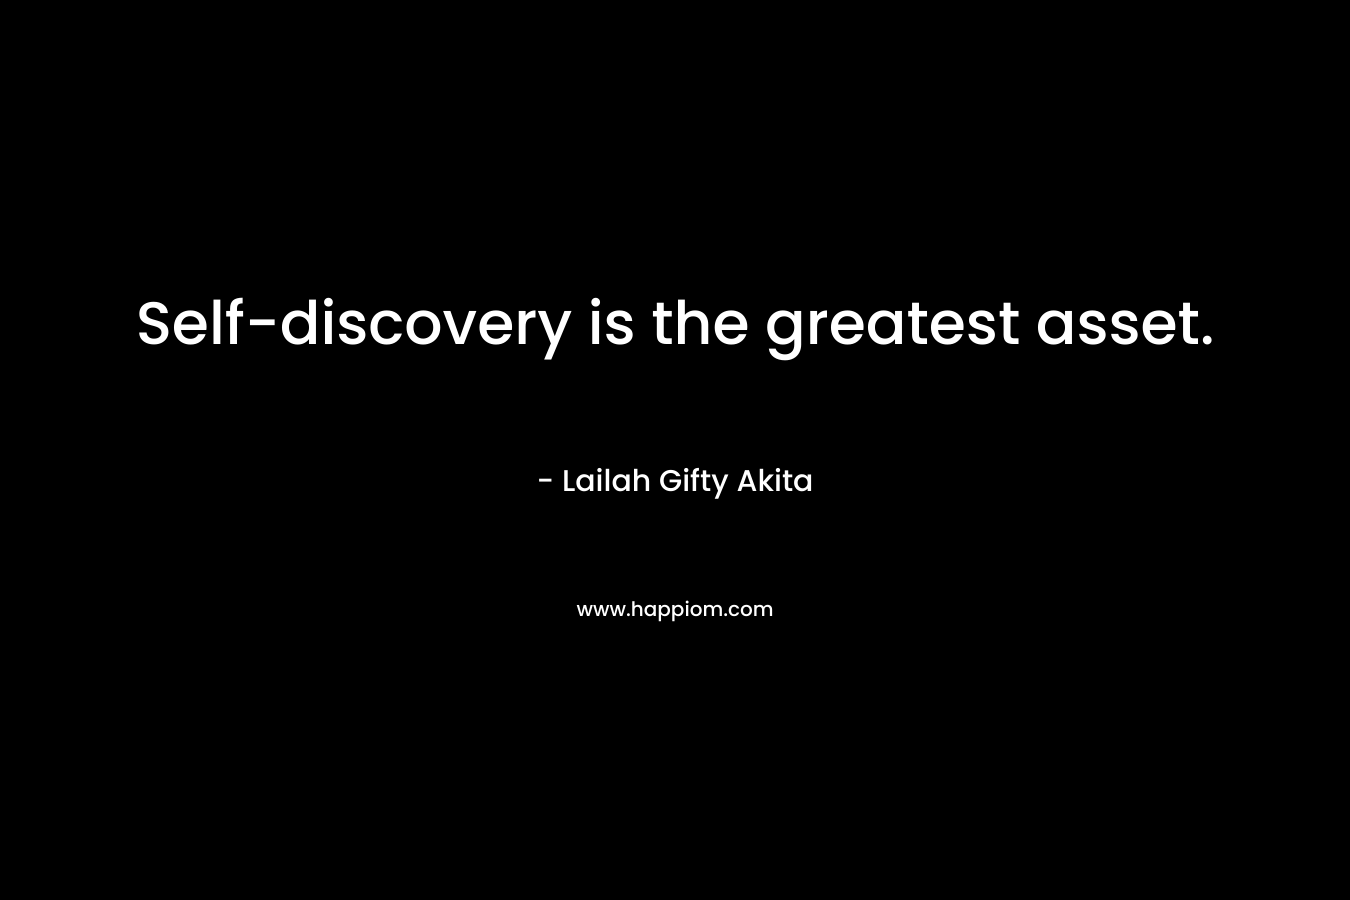 Self-discovery is the greatest asset. – Lailah Gifty Akita